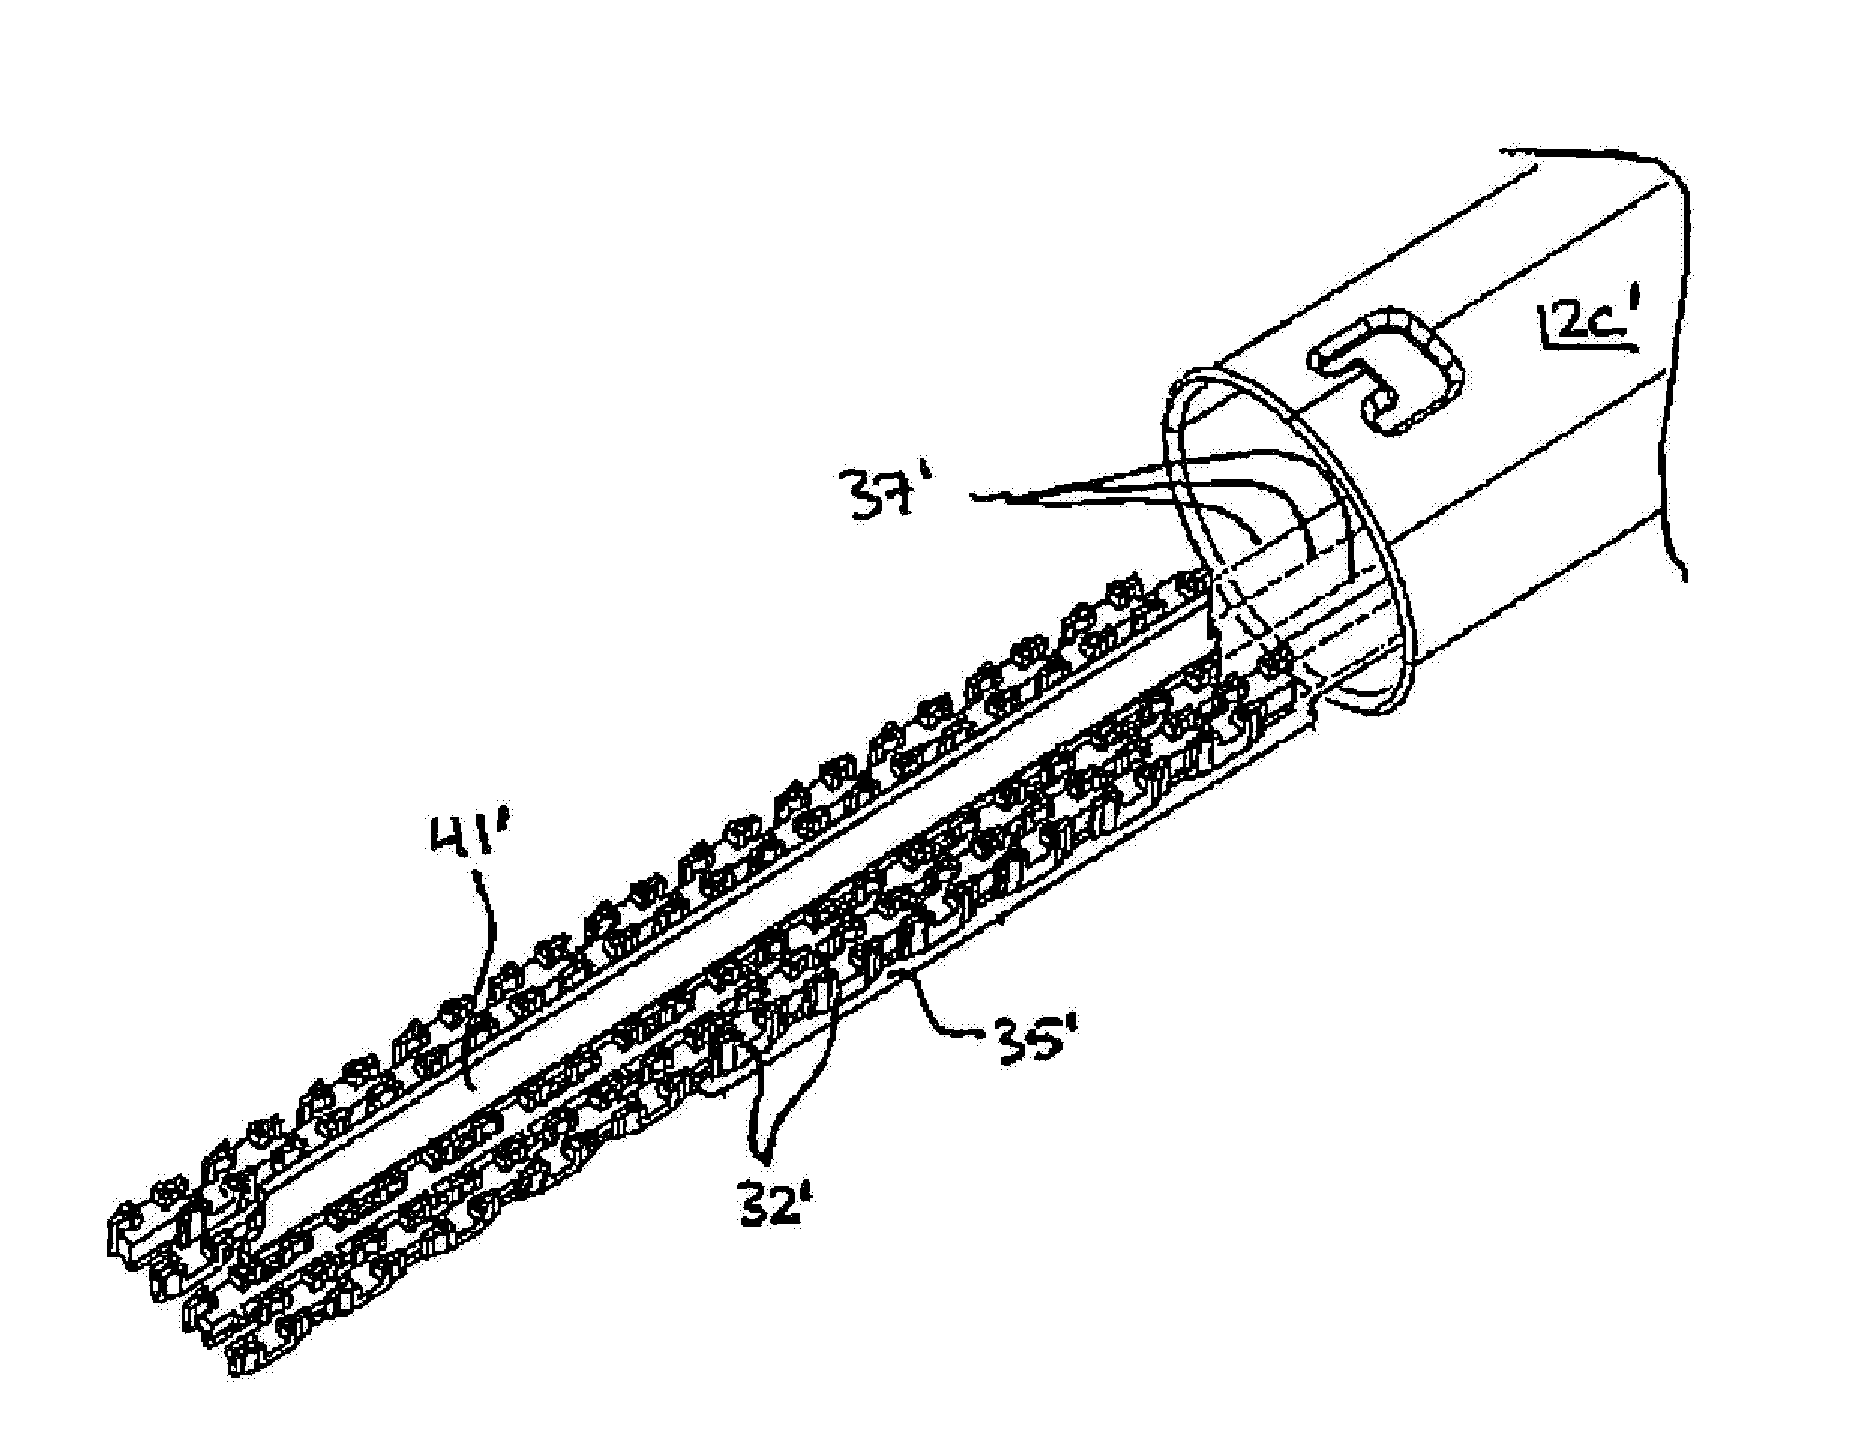 Electroactive polymer-based actuation mechanism for linear surgical stapler